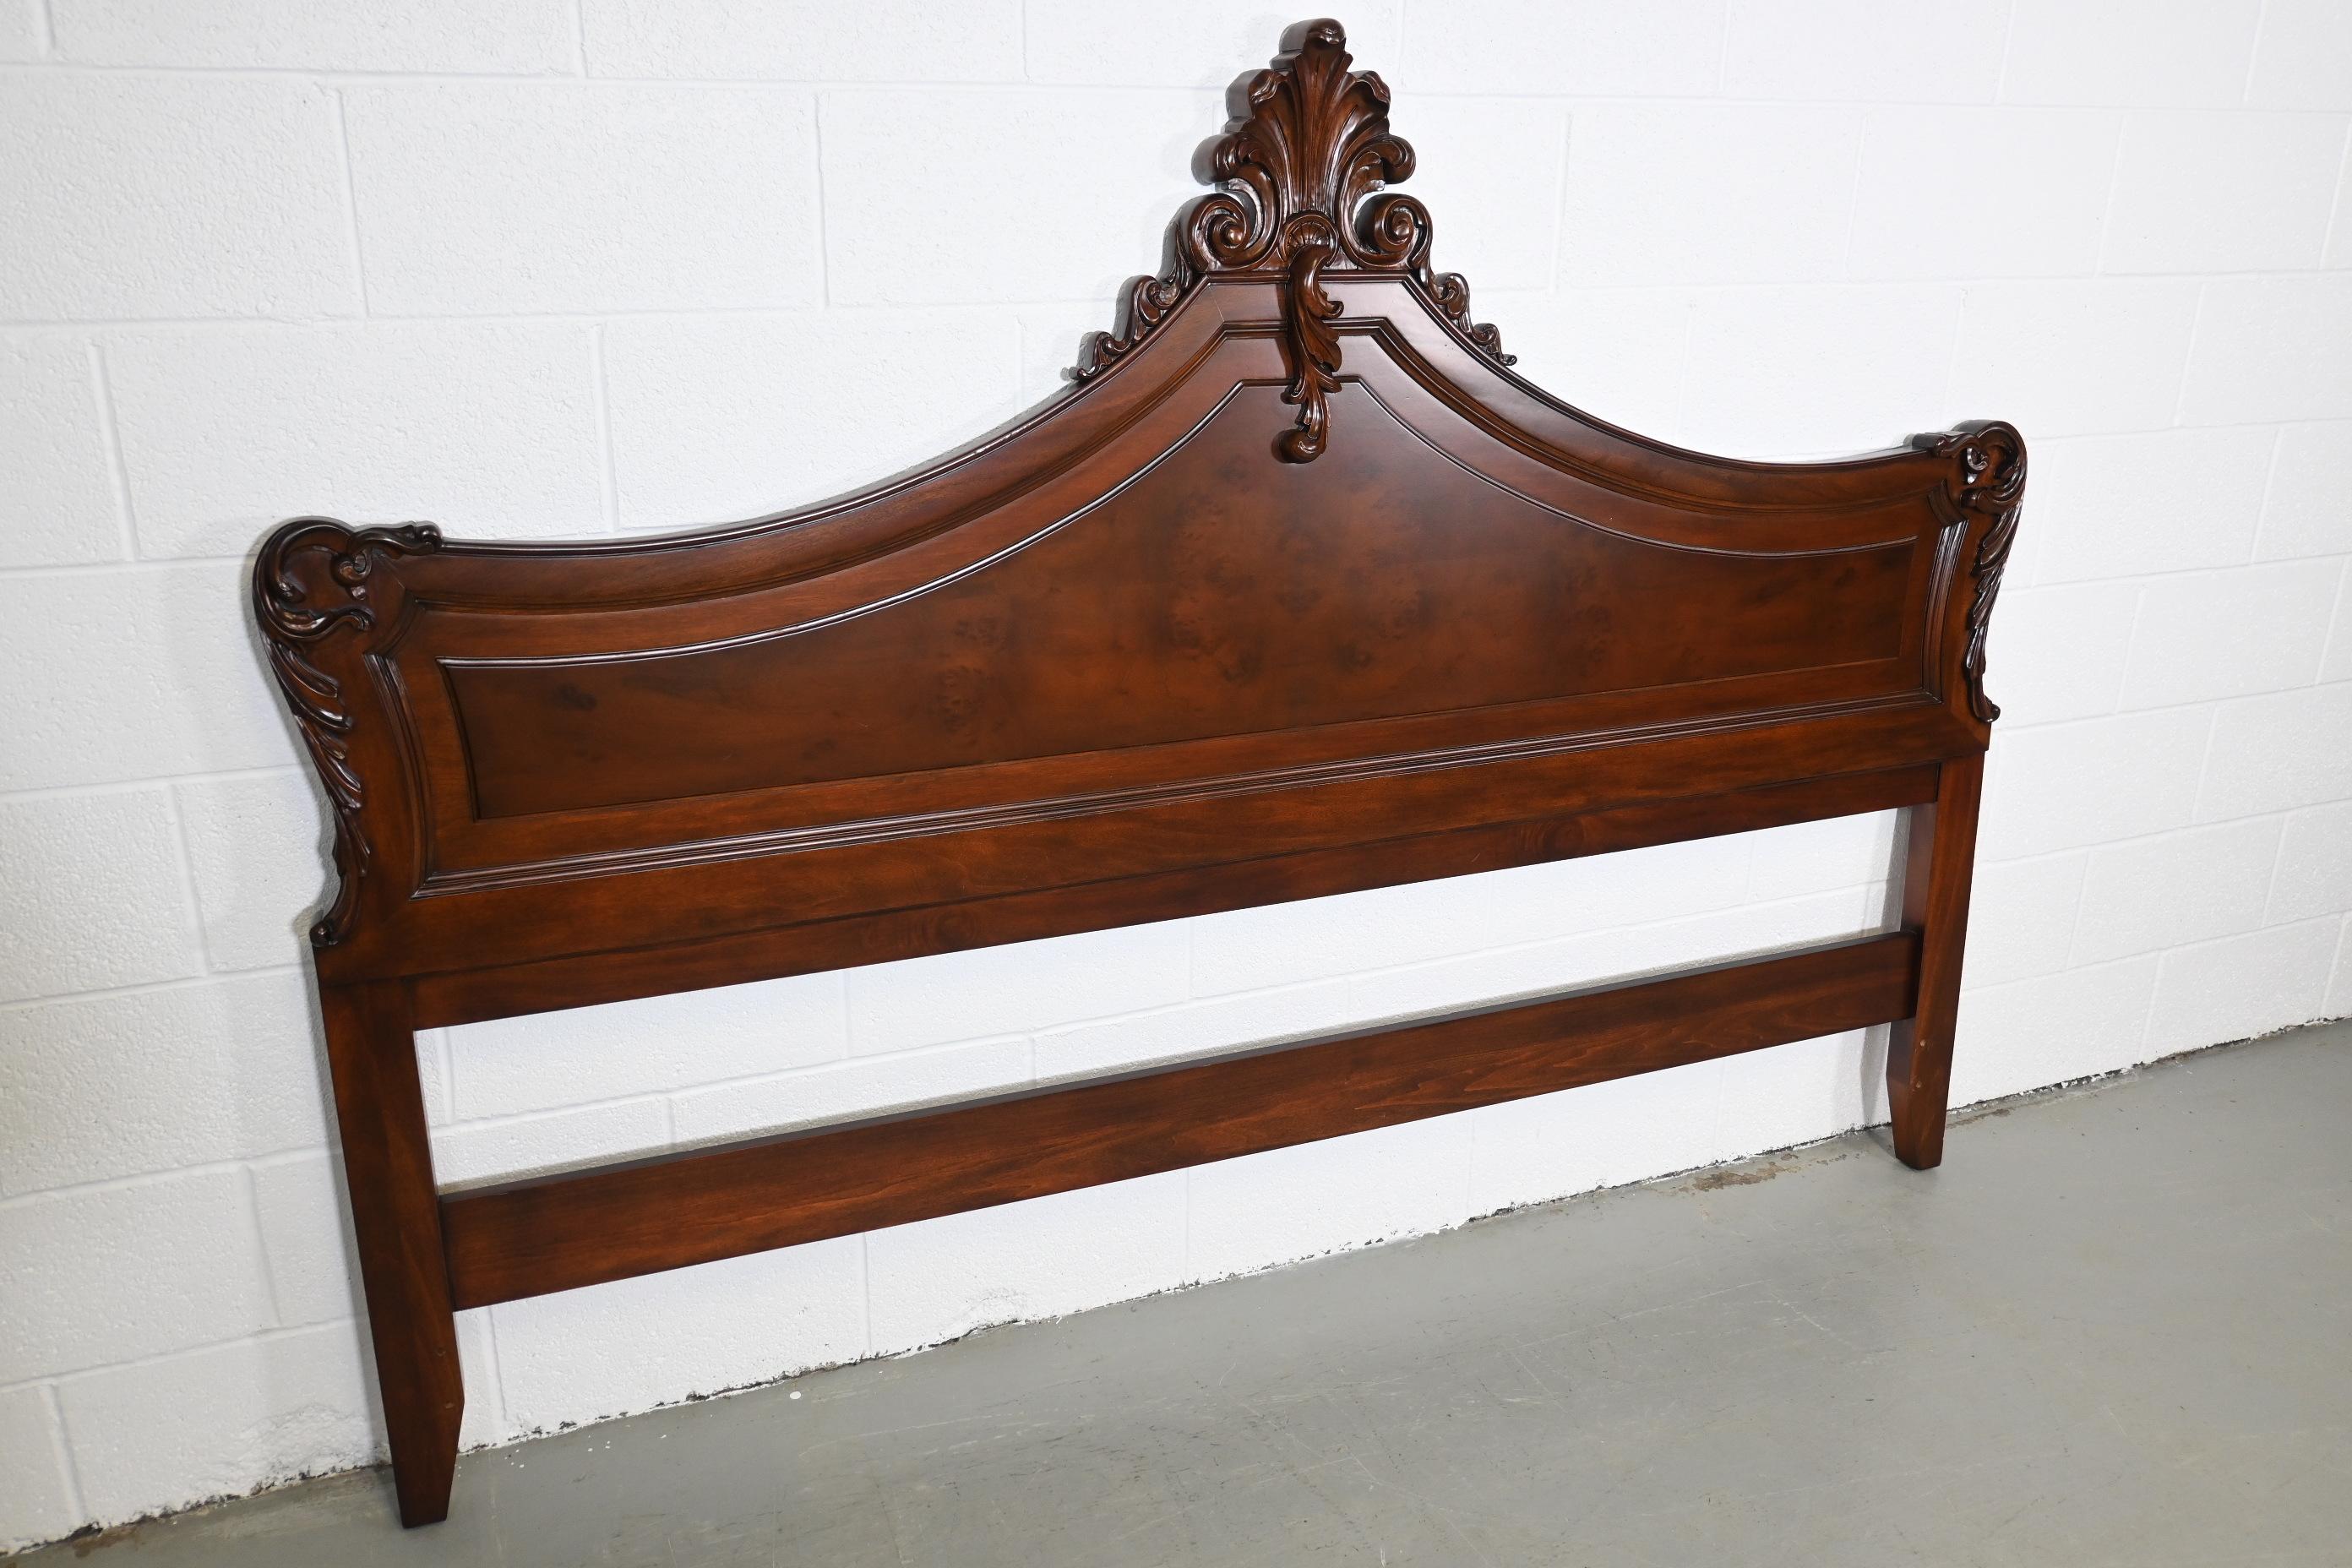 Karges Rococo French style burl wood king headboard.

Karges, USA, 1980s.

Measures: 80